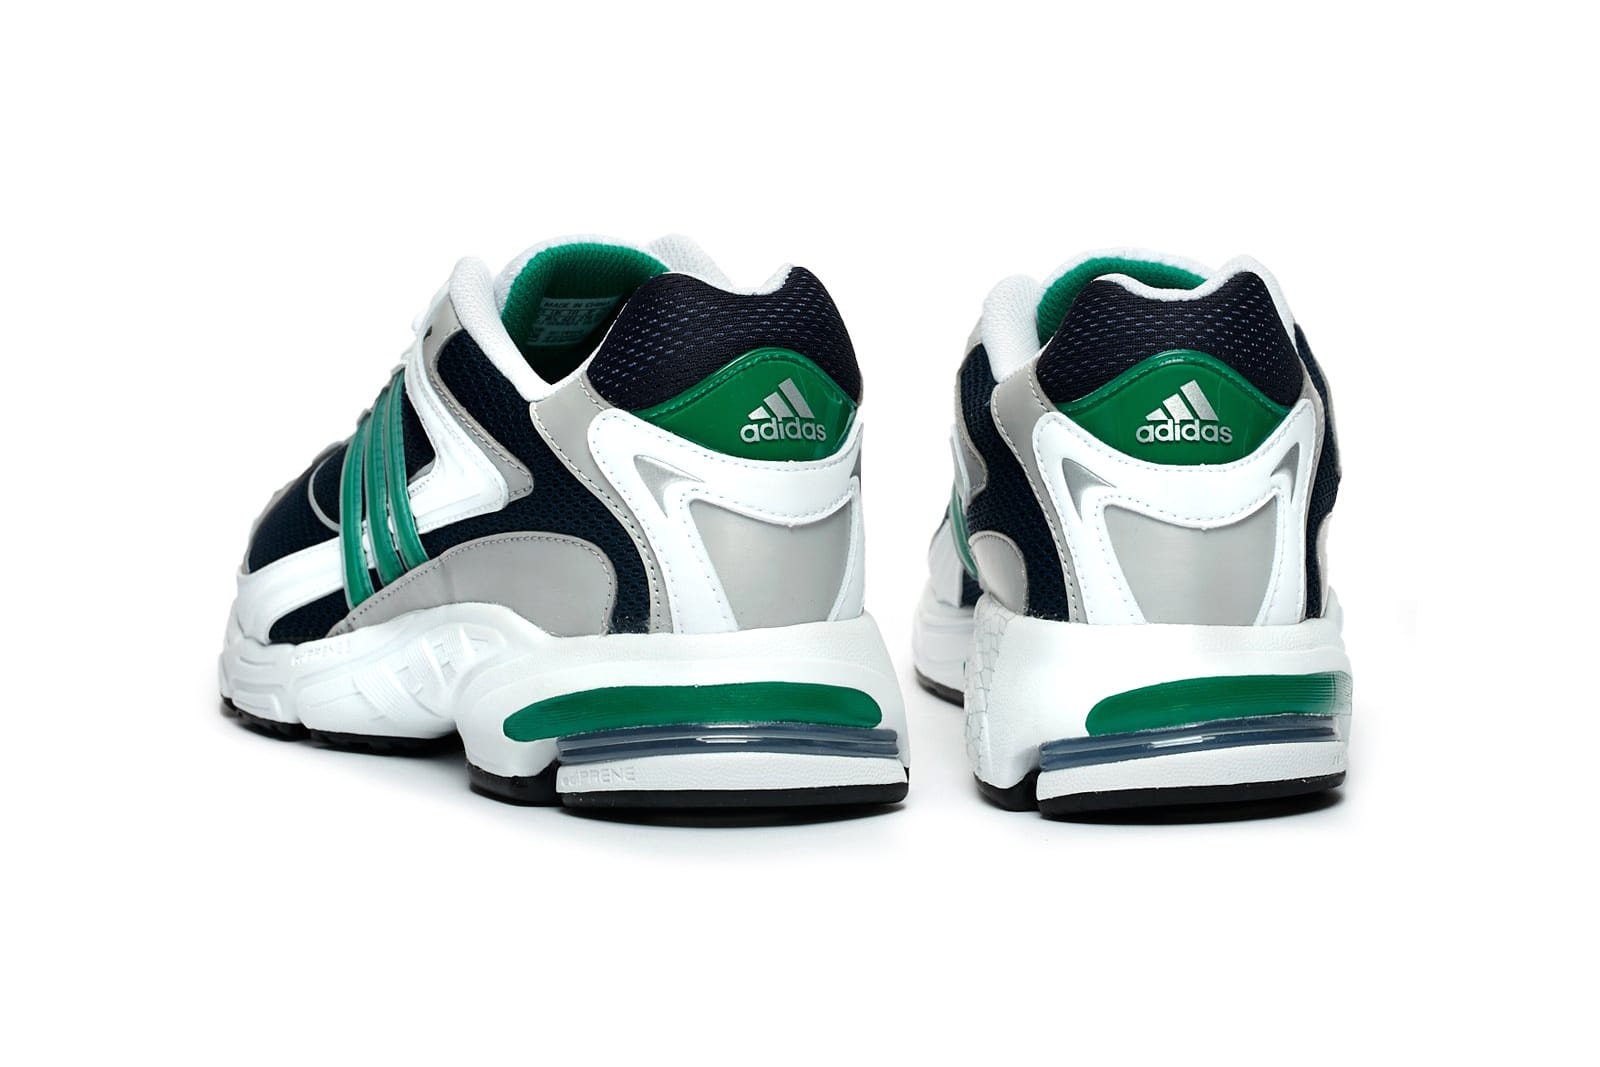 early 2000s adidas shoes